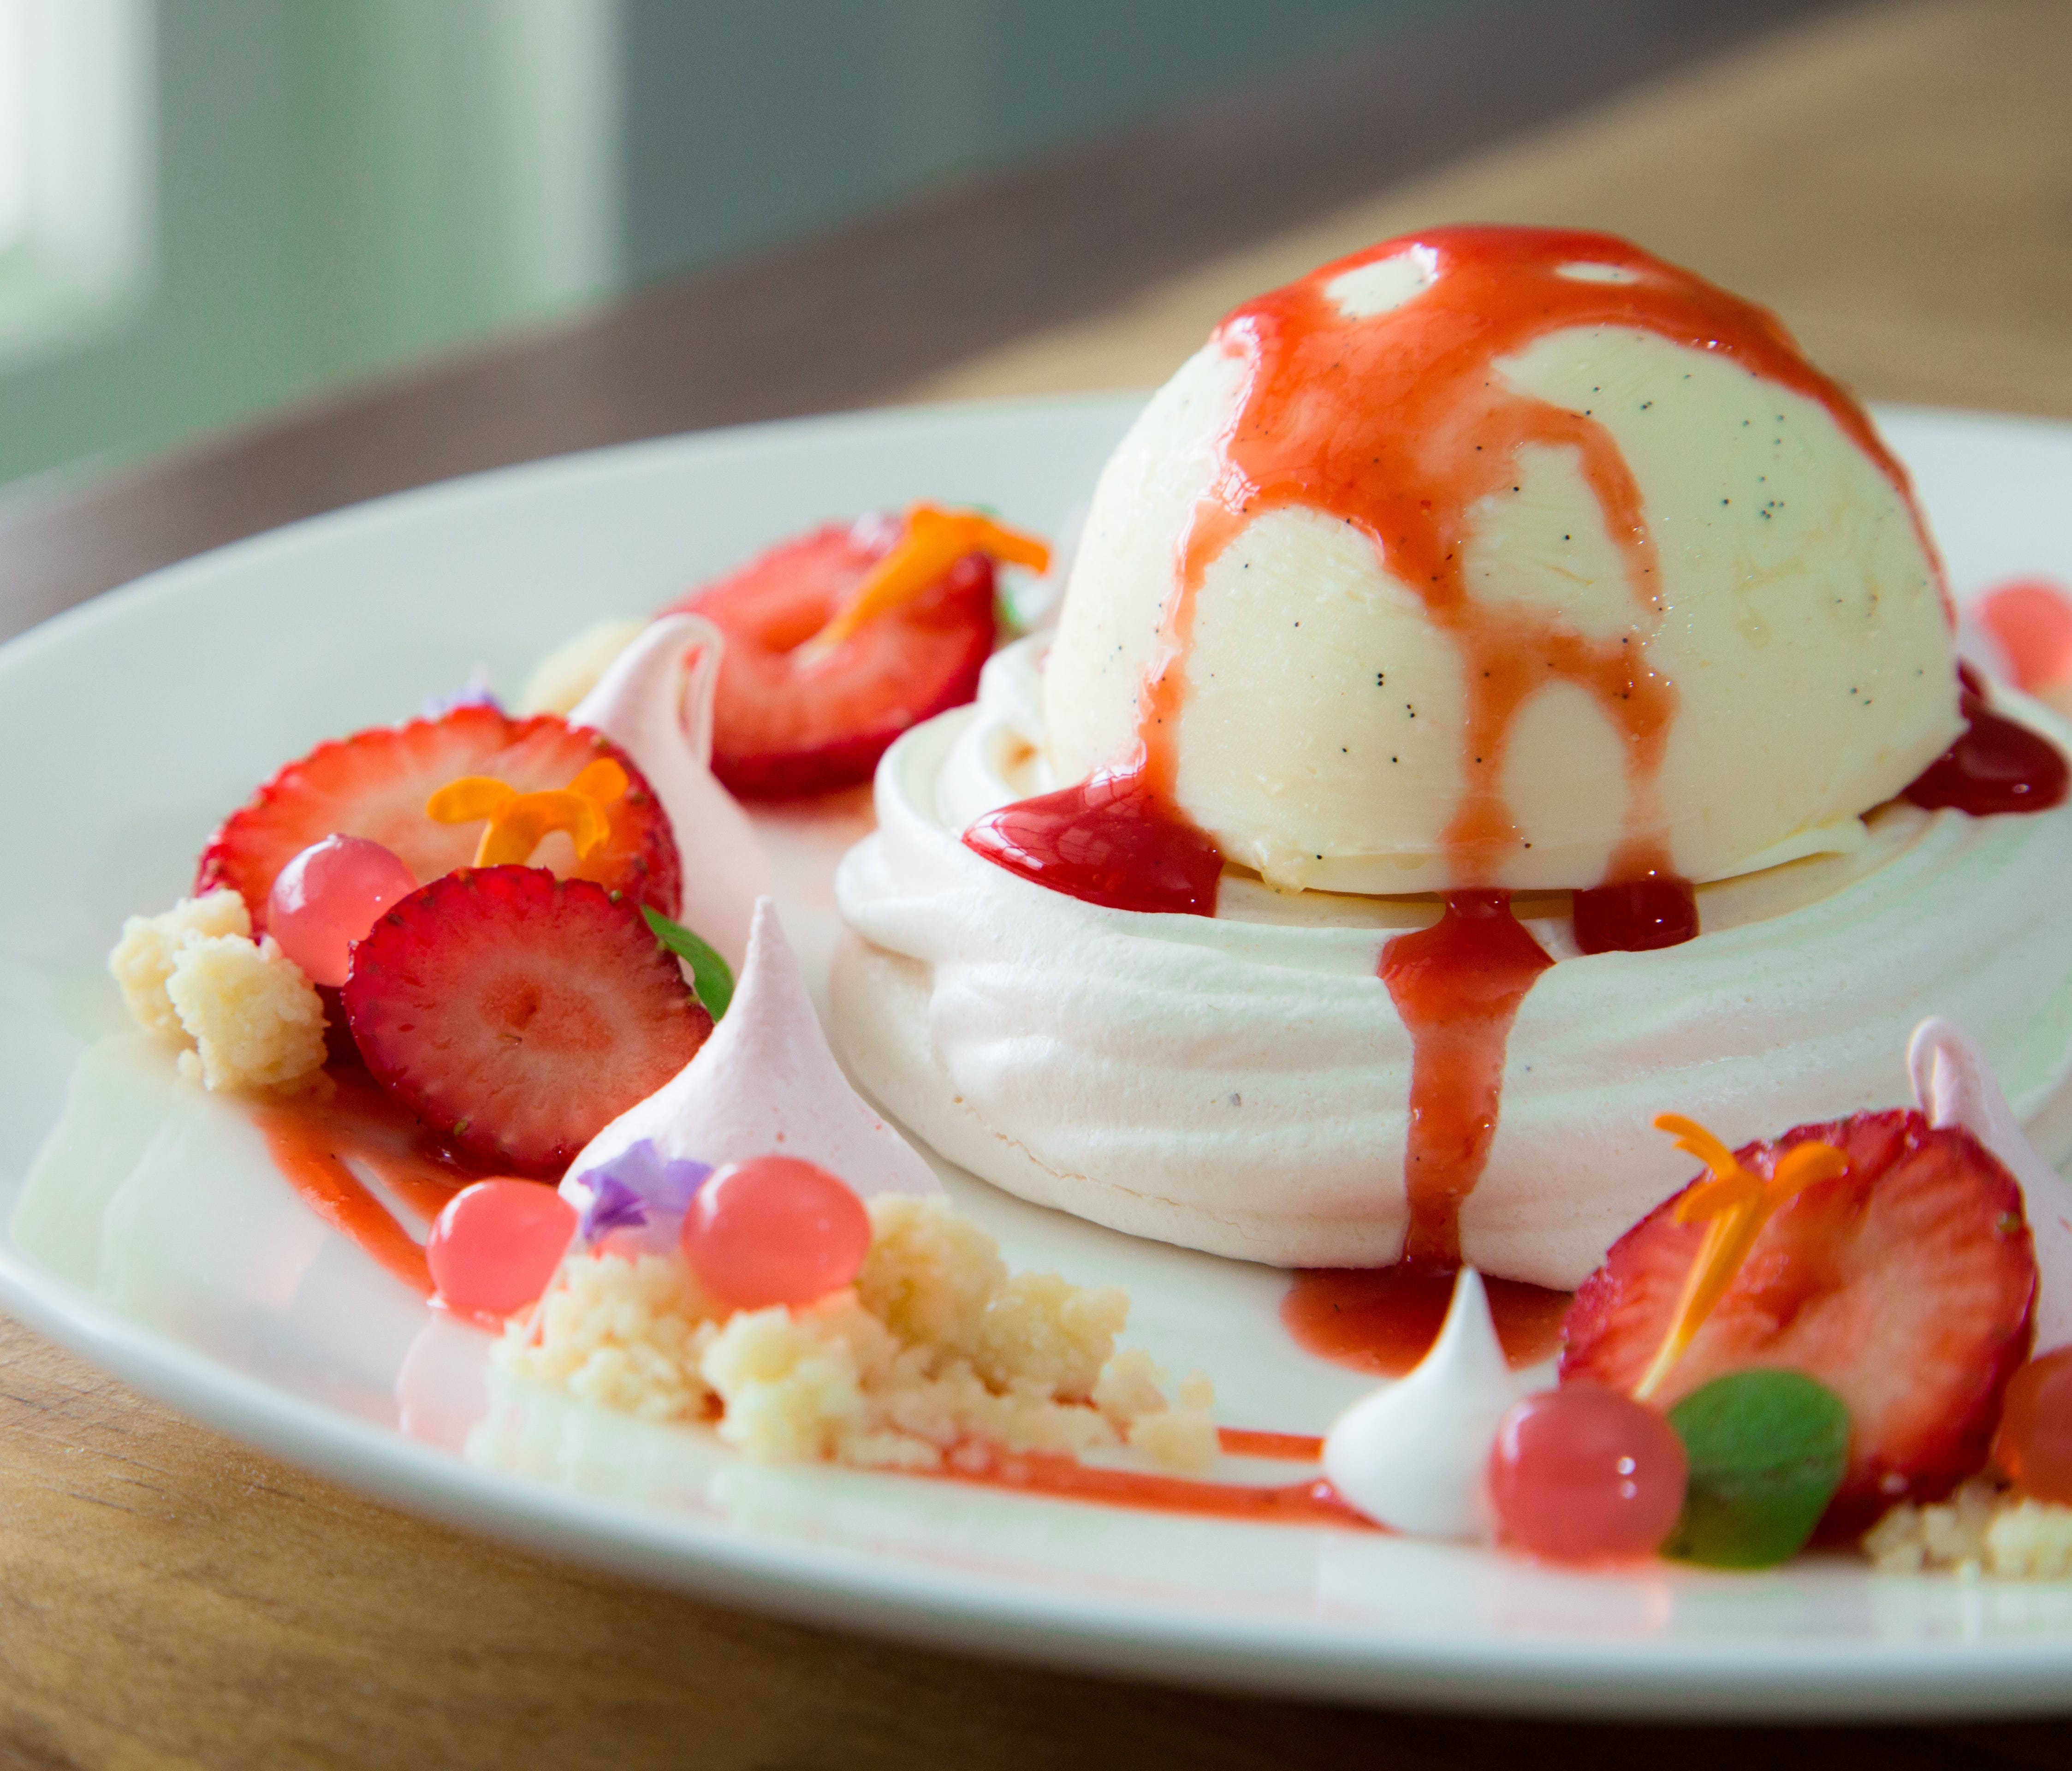 In Salado, Texas, Stagecoach Inn offers the Strawberry Kiss dessert, a meringue topped with vanilla bean ice cream and fresh strawberry sauce.